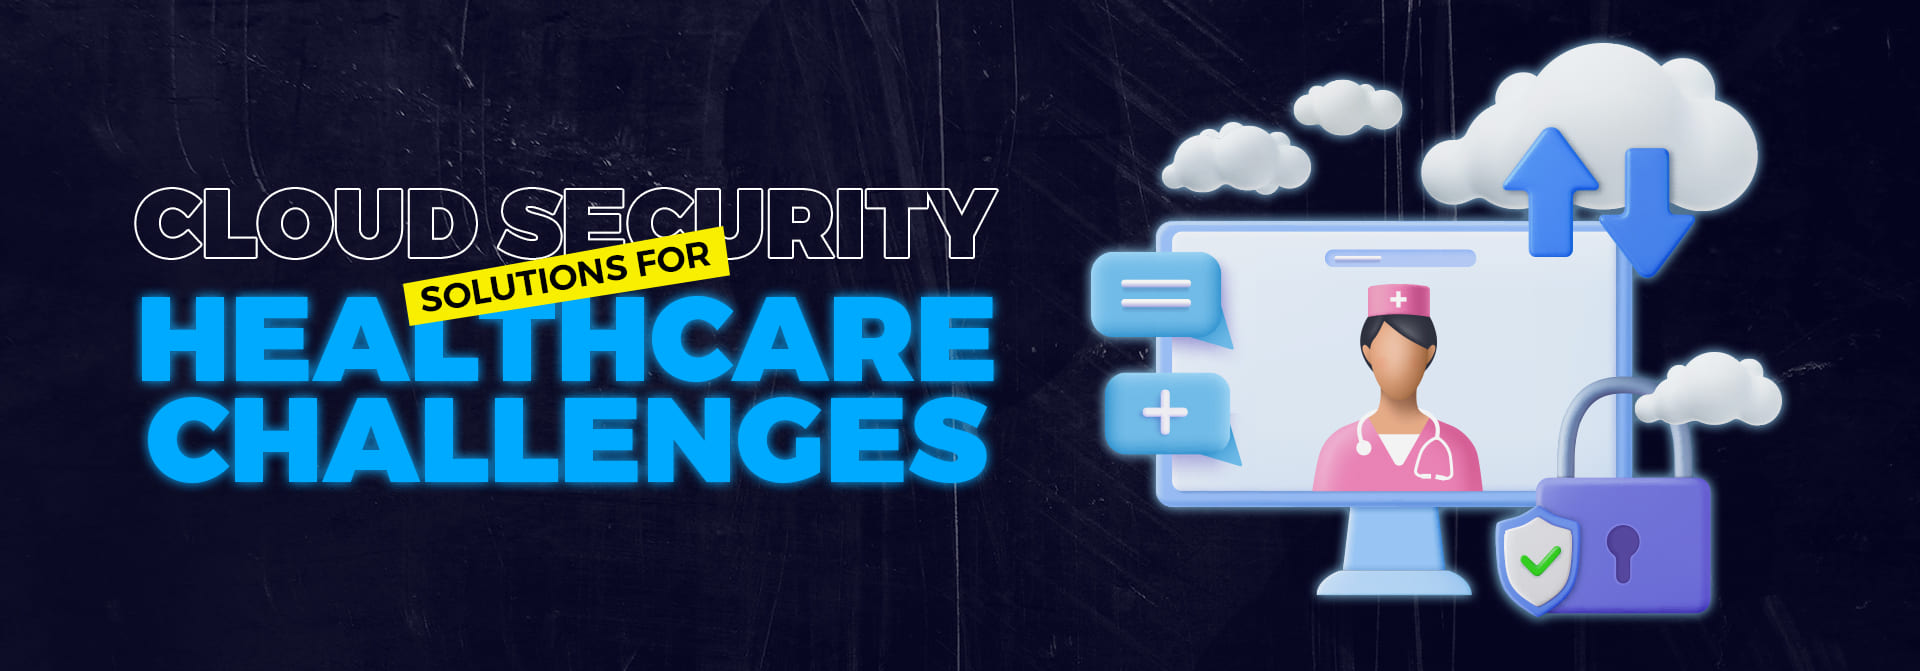 PAC_Cloud Security Solutions for Healthcare Challenges_main banner